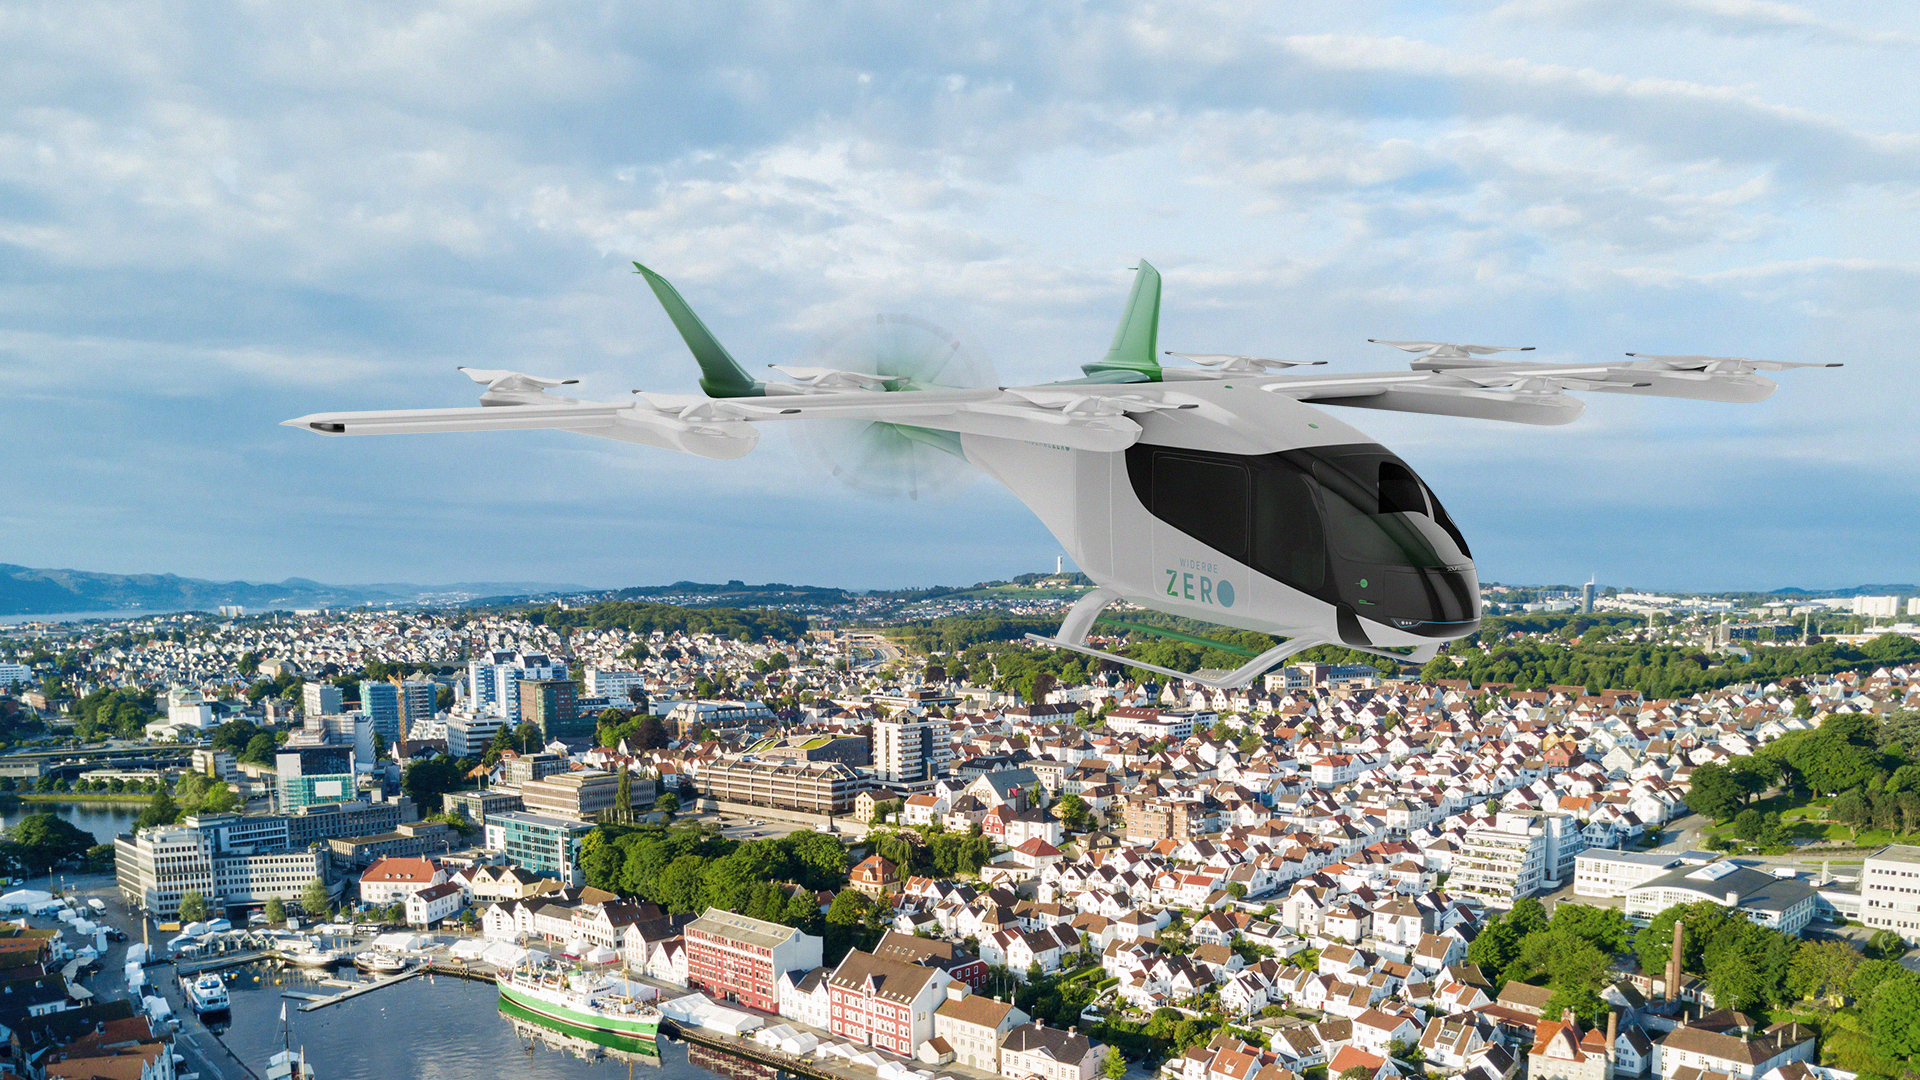 Eve and Widerøe Zero Extend Partnership, Aiming to Launch eVTOL Operations in Scandinavia with Up to 50 Aircraft